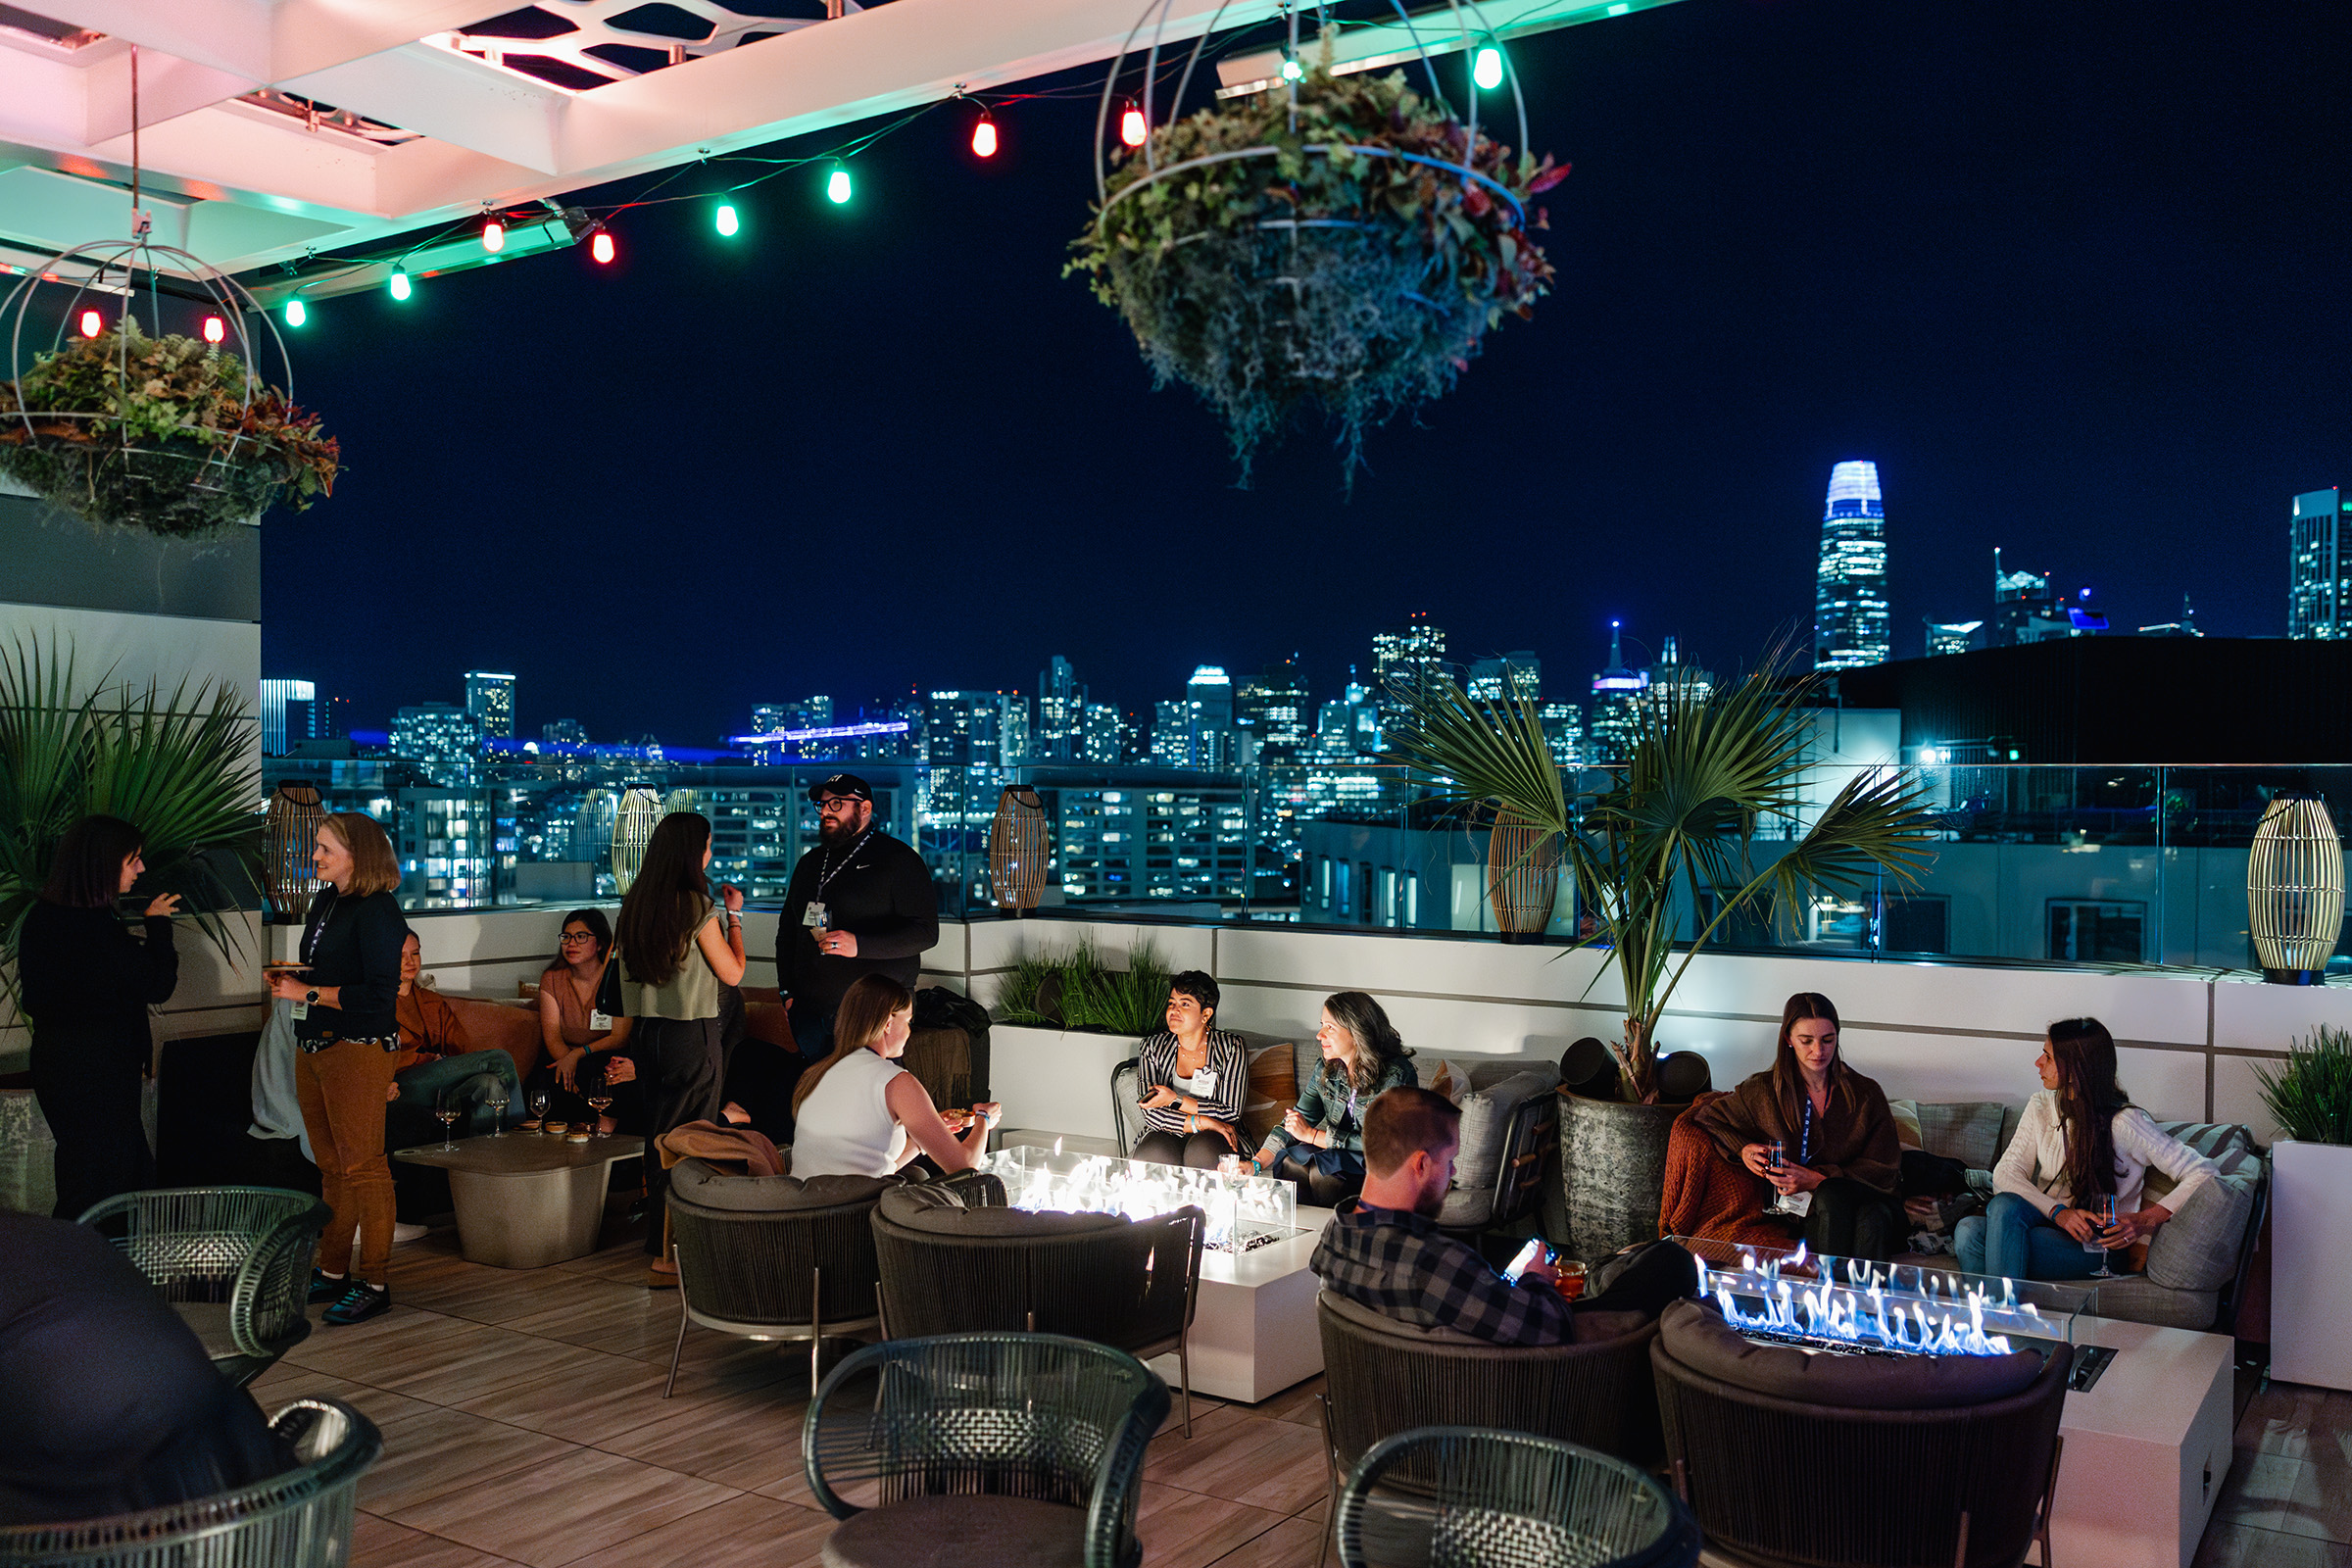 A group of people engaged in content creation on a rooftop with a view of the city.